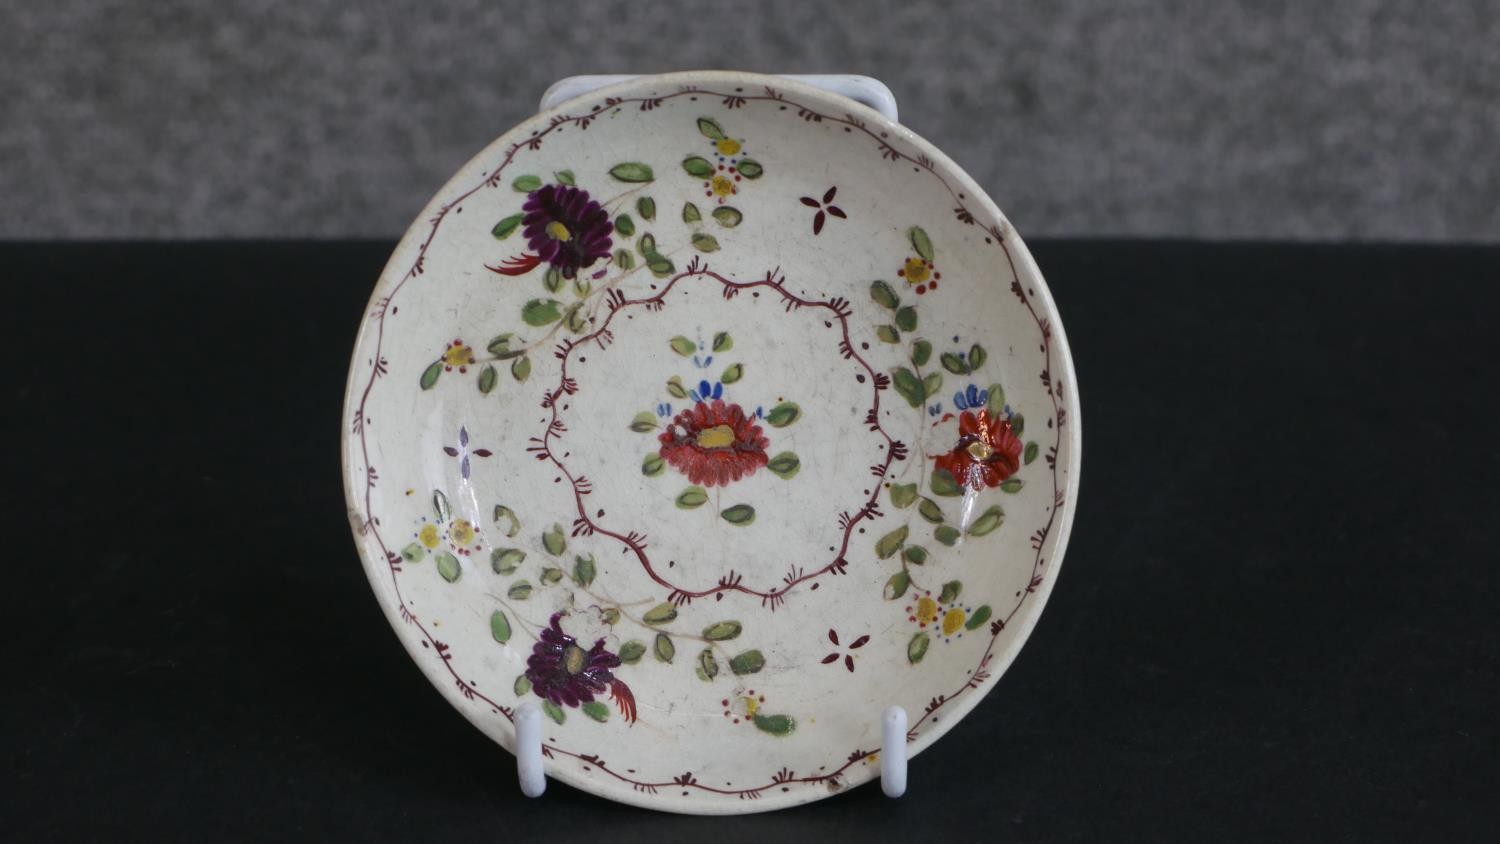 A 19th century floral design hand-painted ceramic dolls tea set for four people (one cup missing), - Image 6 of 8